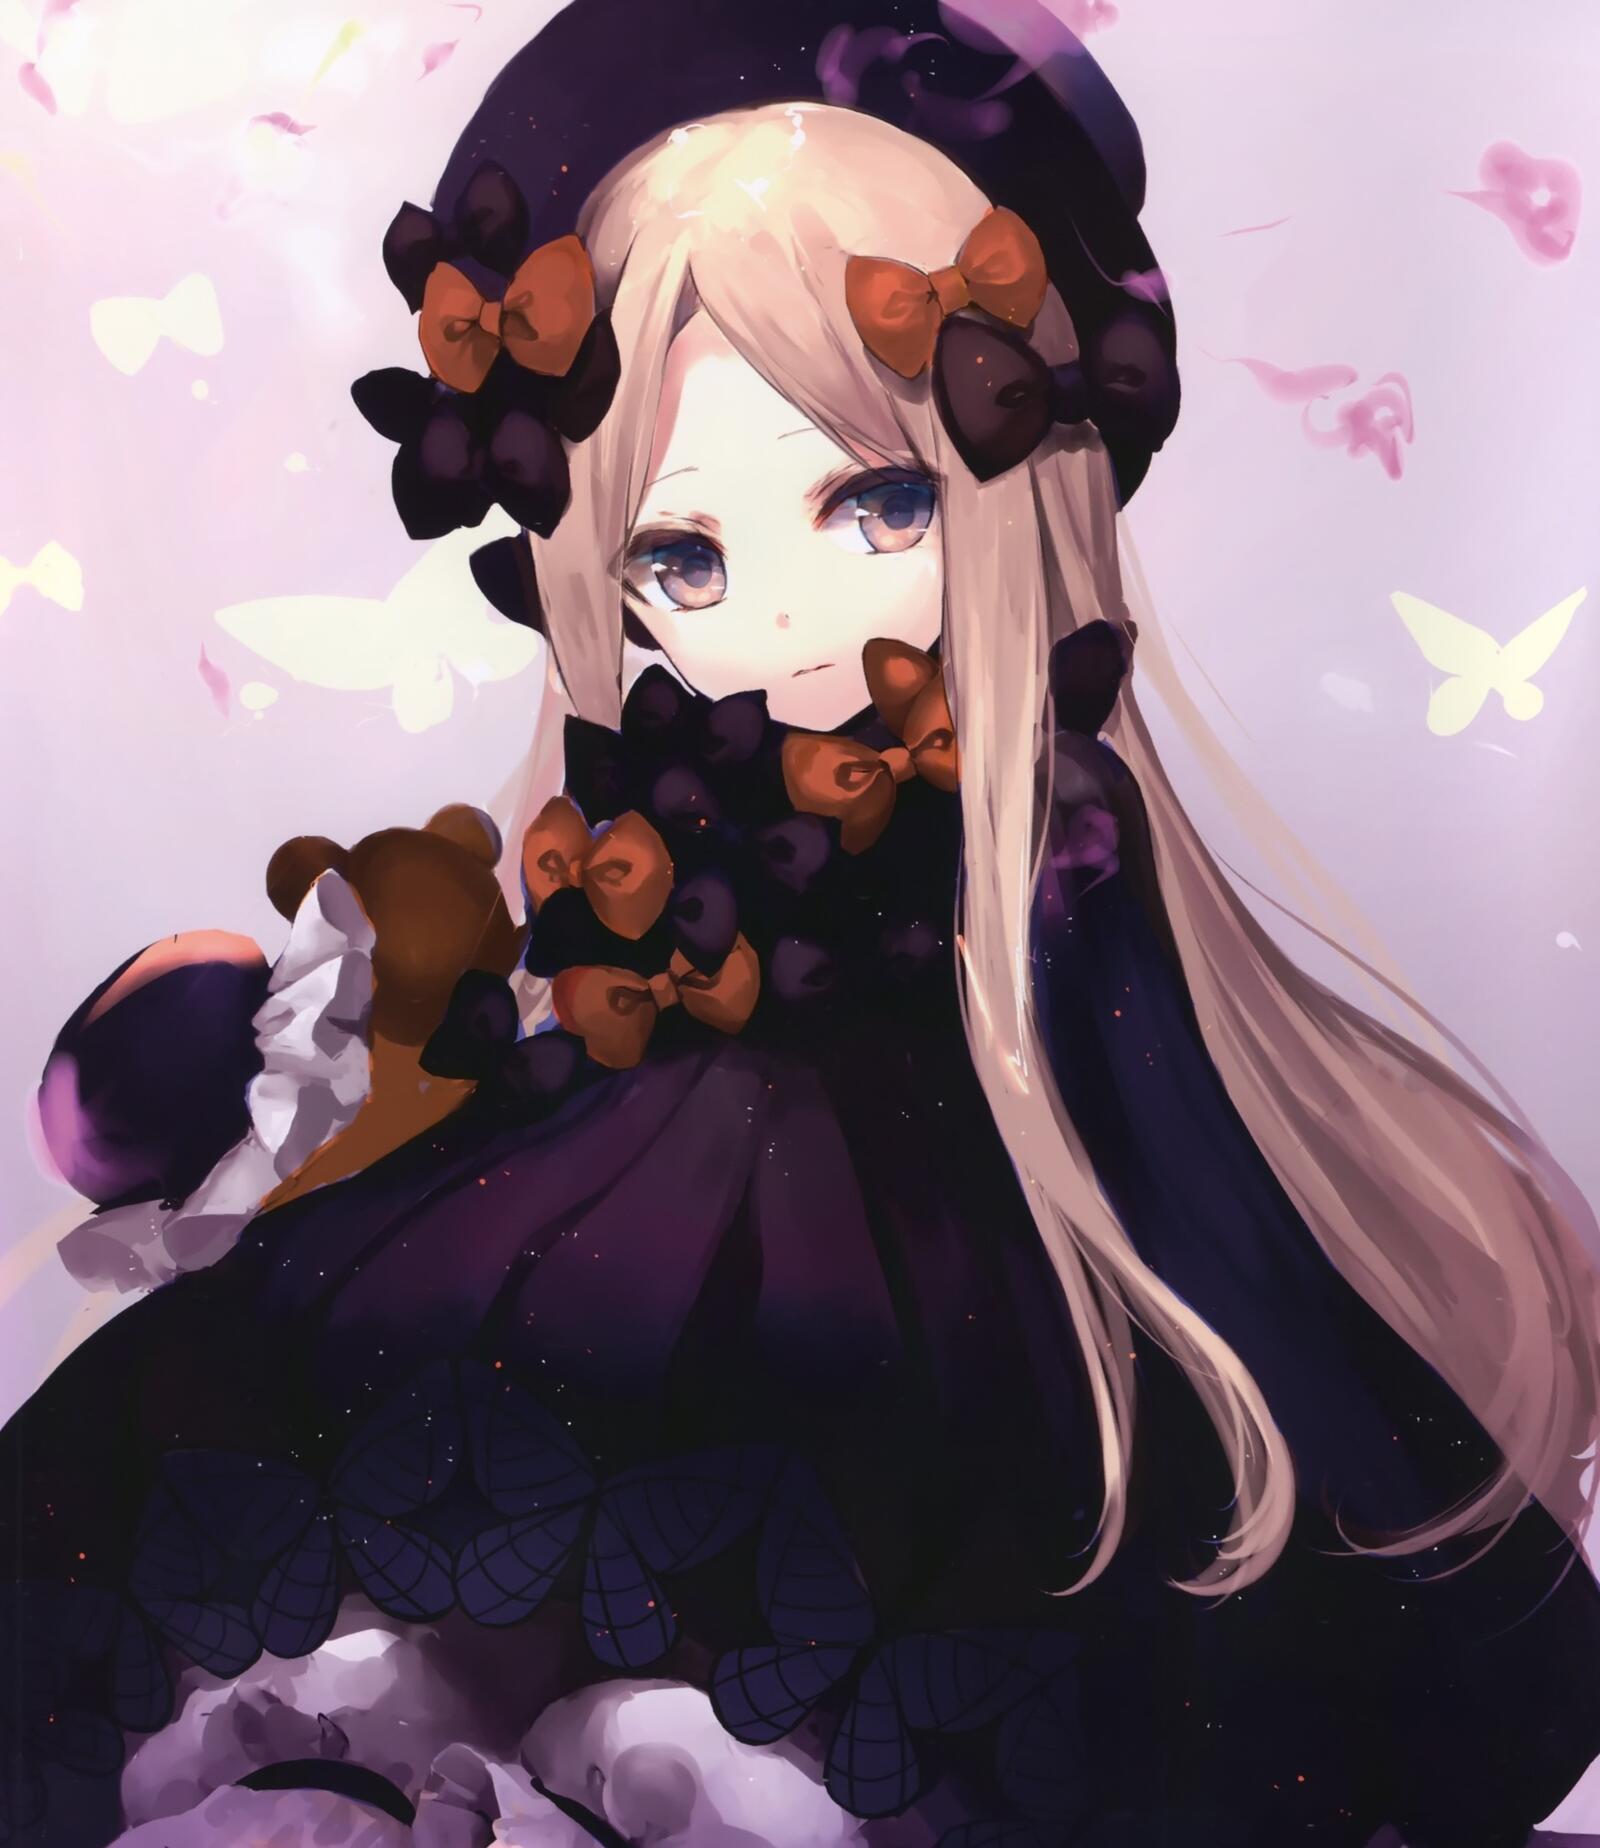 Free photo Anime girl Abigail Williams with bows in her hair.